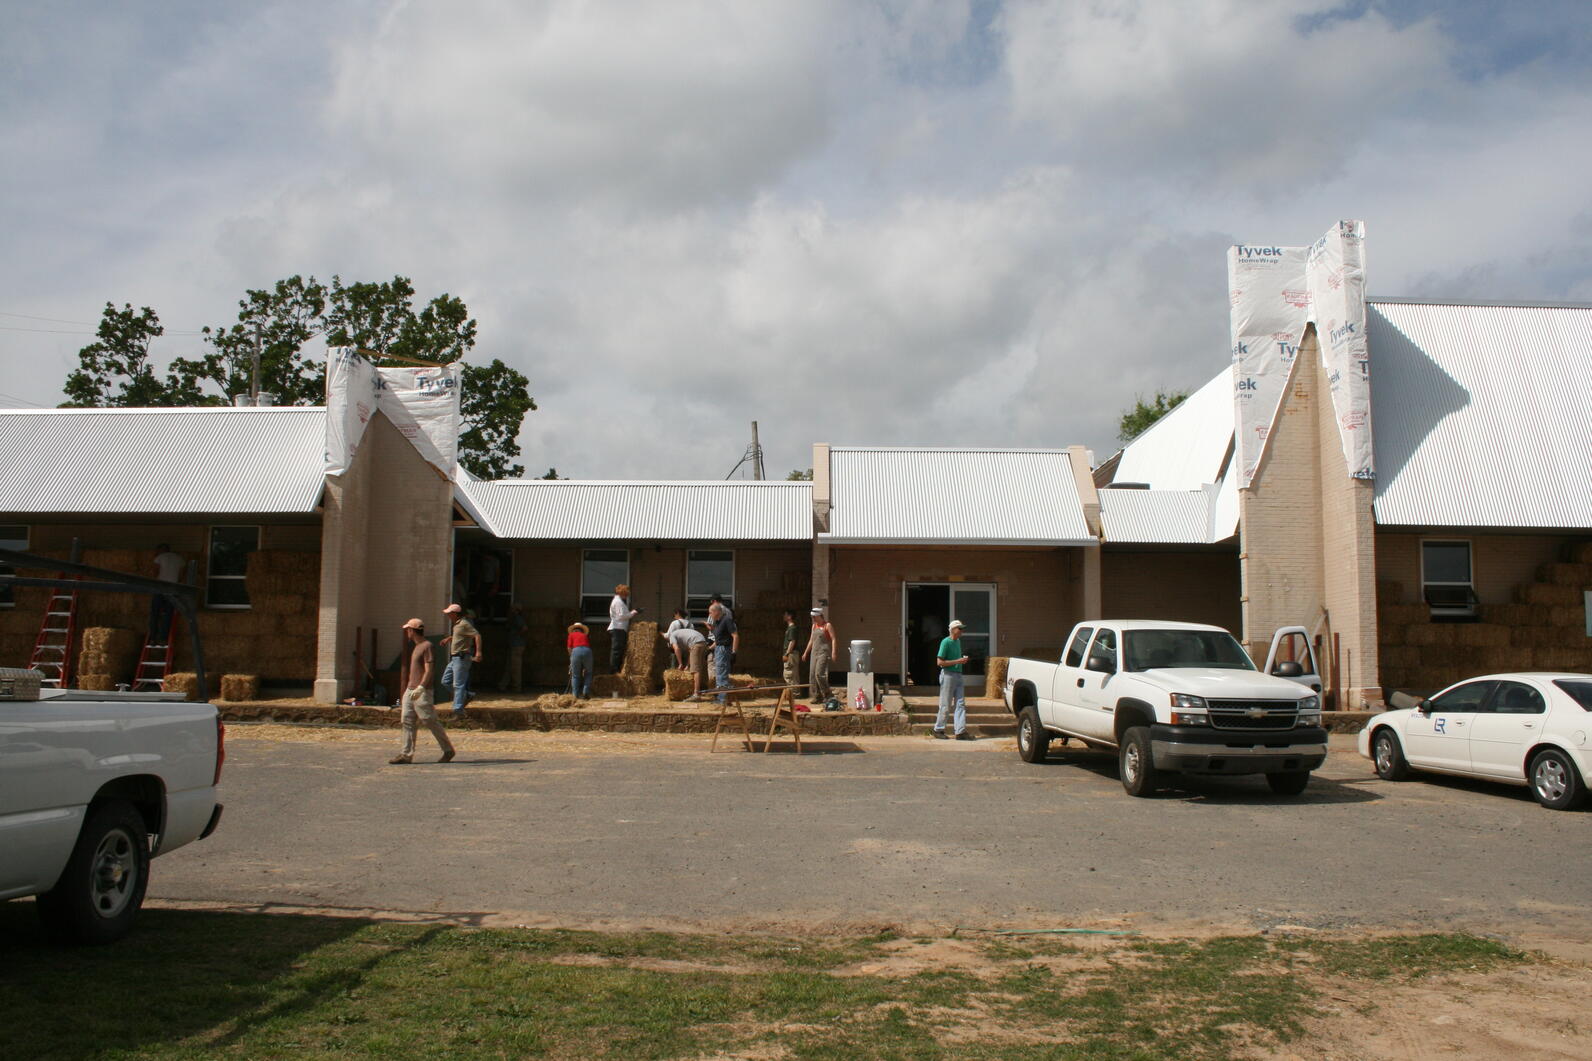 A building under construction with Tyvek paper still exposed. A group of people are at work in front of the building.